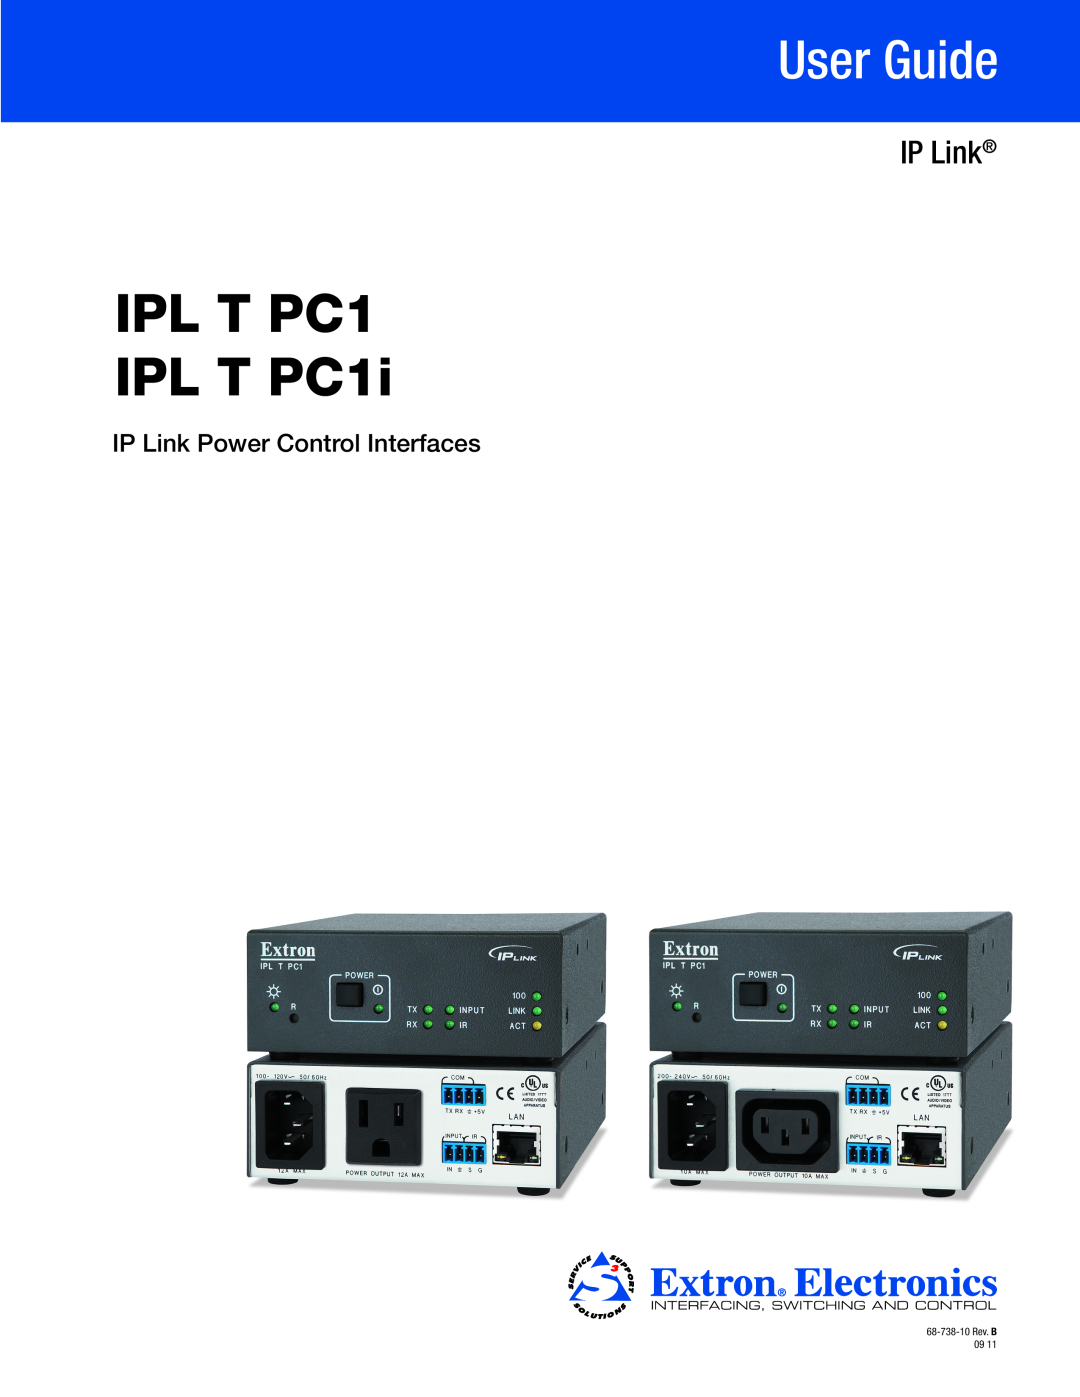 Extron electronic setup guide Setup Guide Checklist, IPL T PC1 and IPL T PC1i, IP Link Power Control Interface 